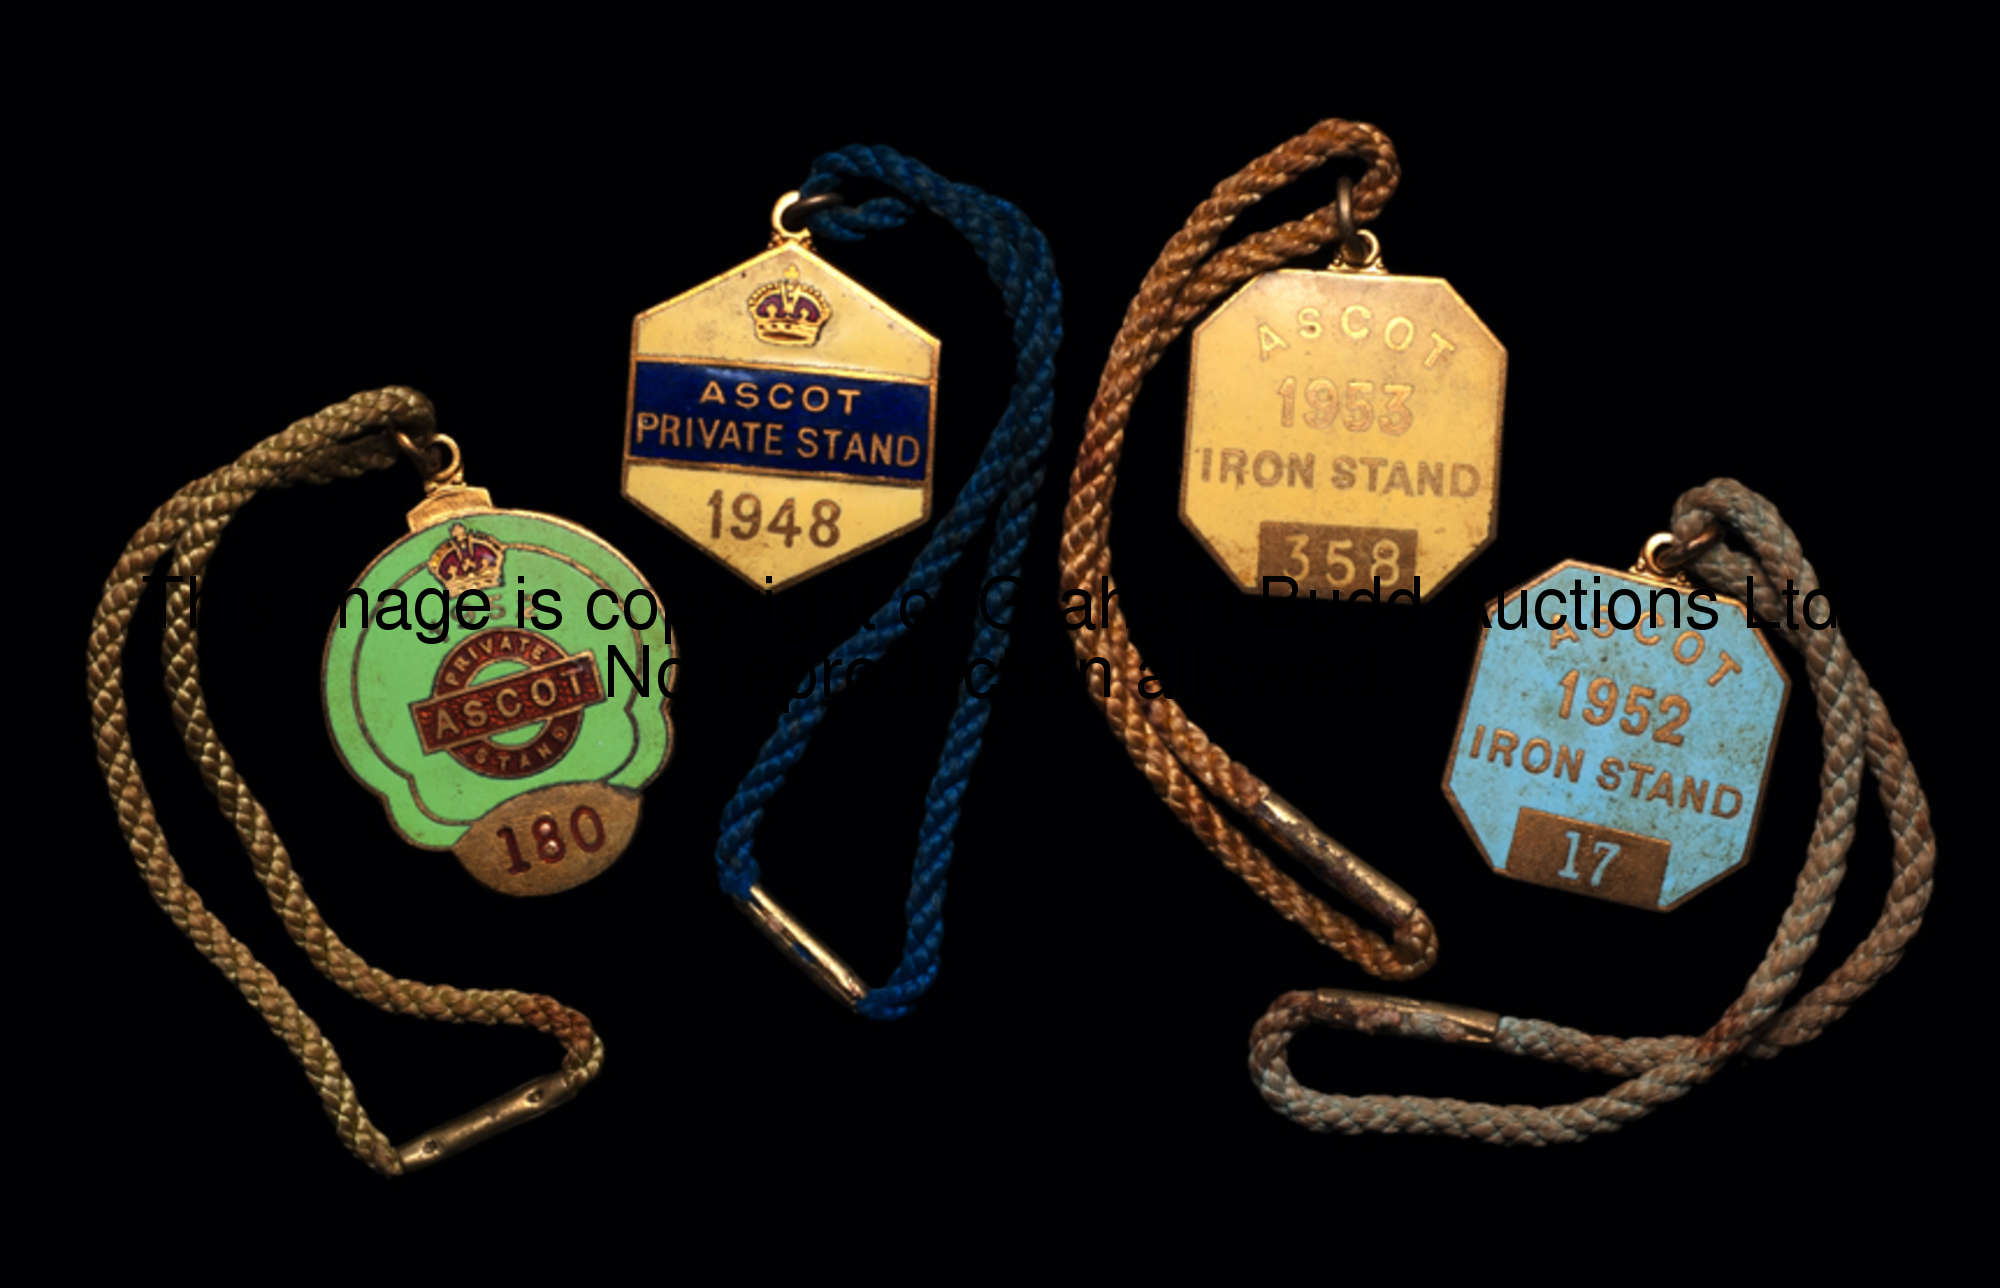 24 members' badges for Ascot Racecourse, all gilt-metal & enamel, Private Stand for 1948, 1952, 1953...